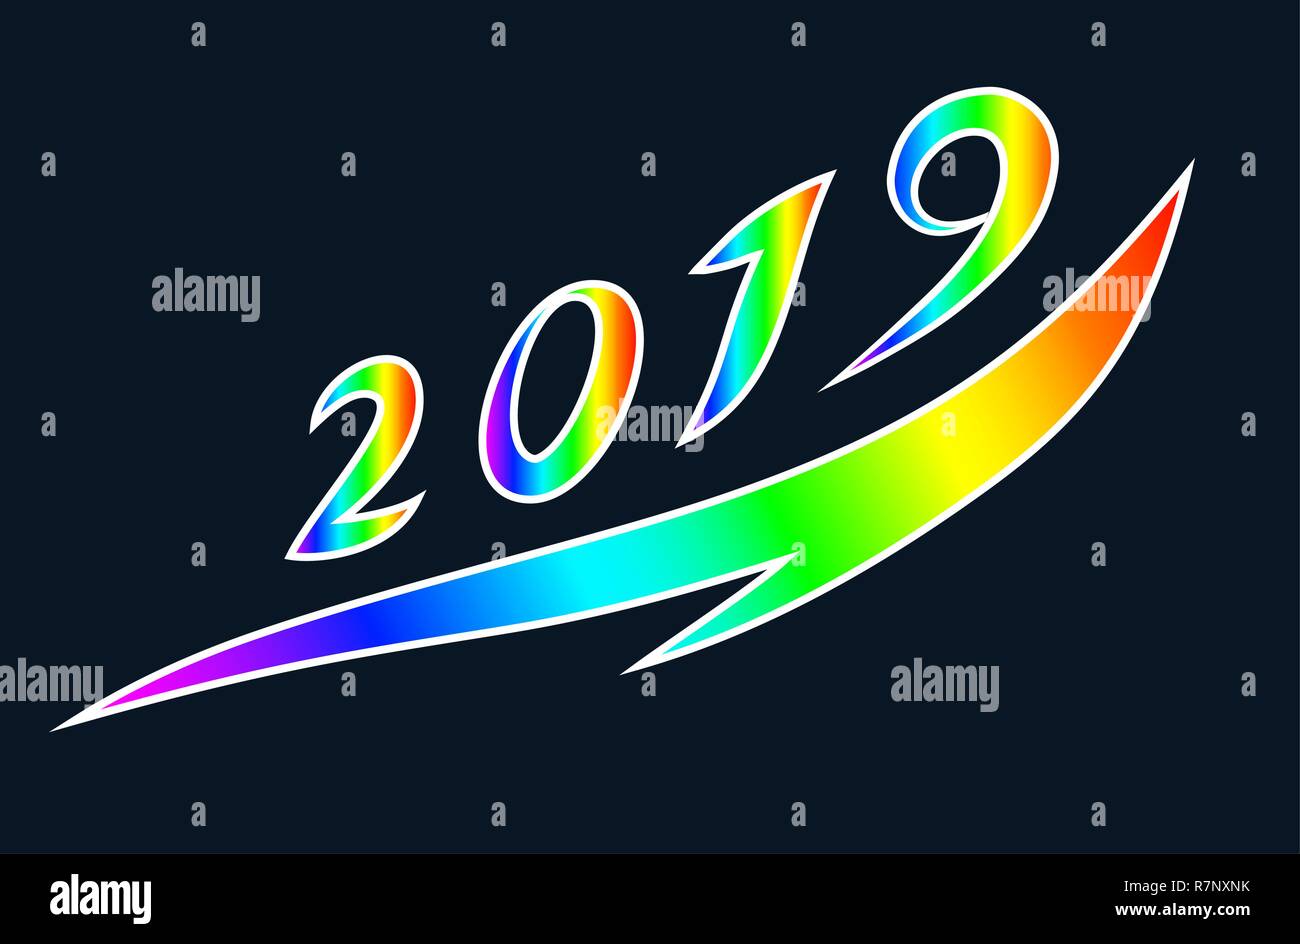 Stylized numbers of 2019 symbolizing the rise and development. Stock Vector